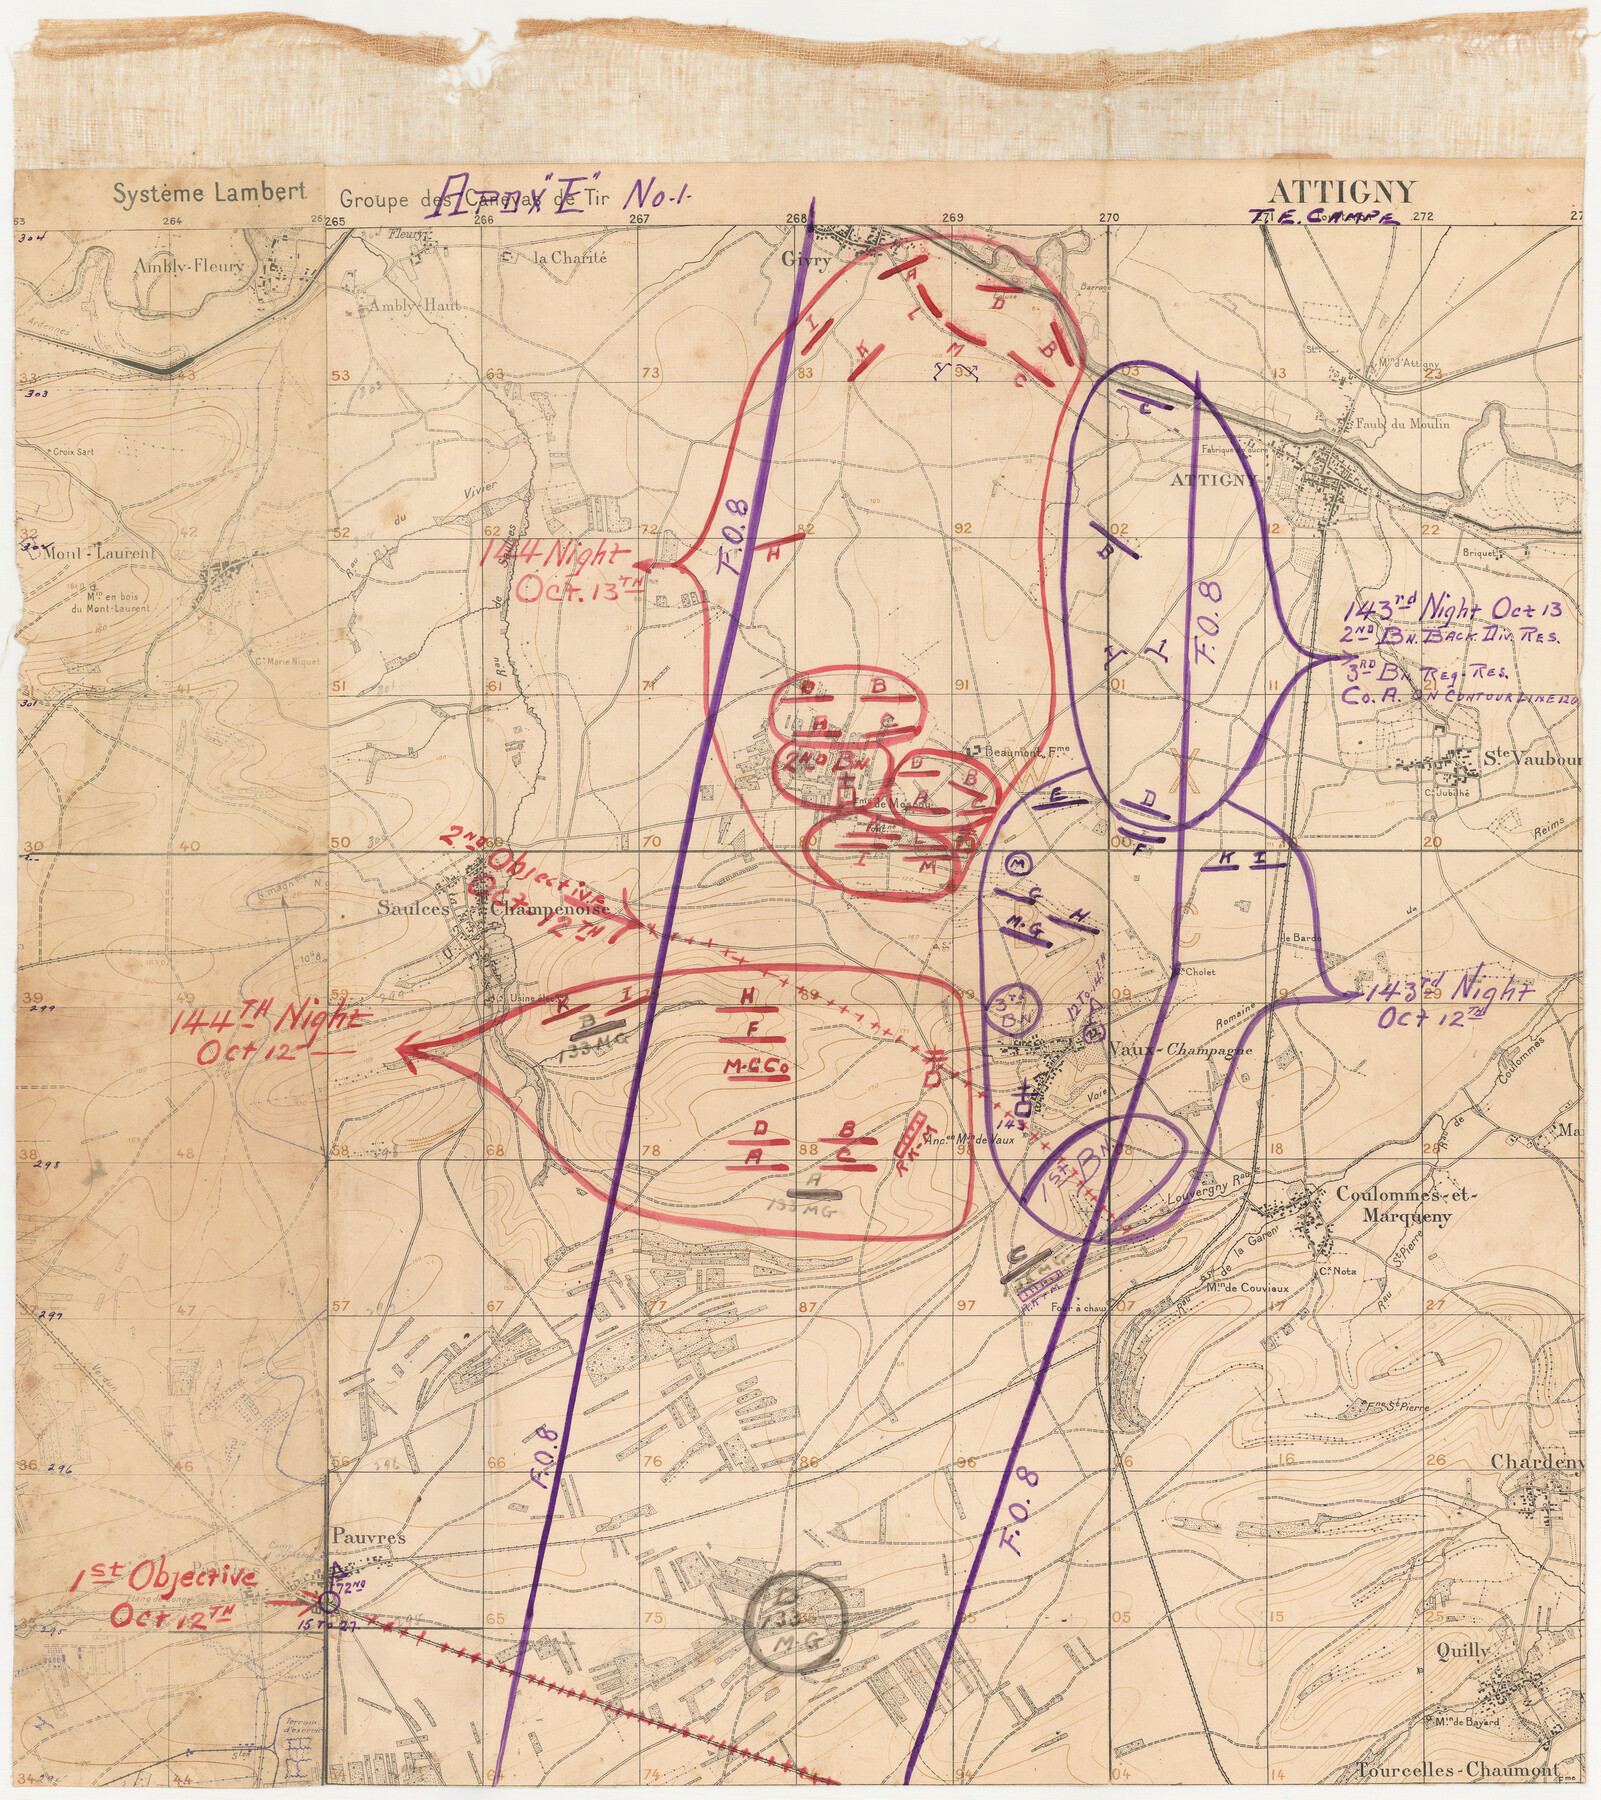 94126, [Movements & Objectives of the 143rd & 144th Infantry on October 12-13, 1918, Appendix E, No.1], Non-GLO Digital Images